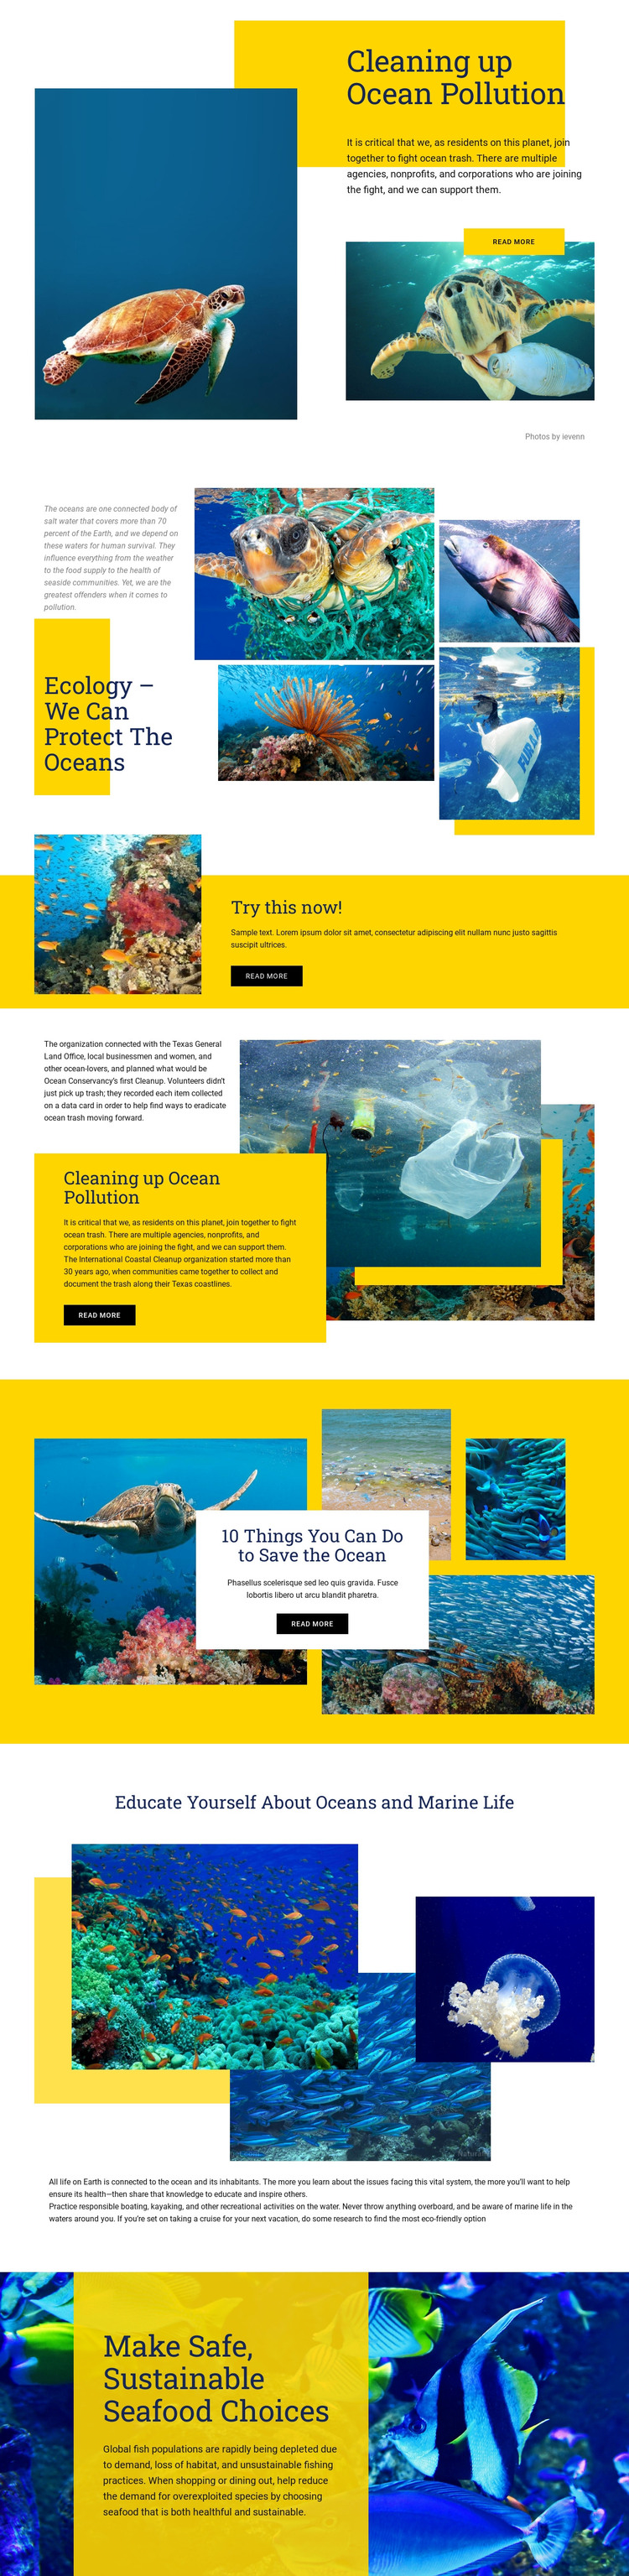 Protect The Oceans Web Design